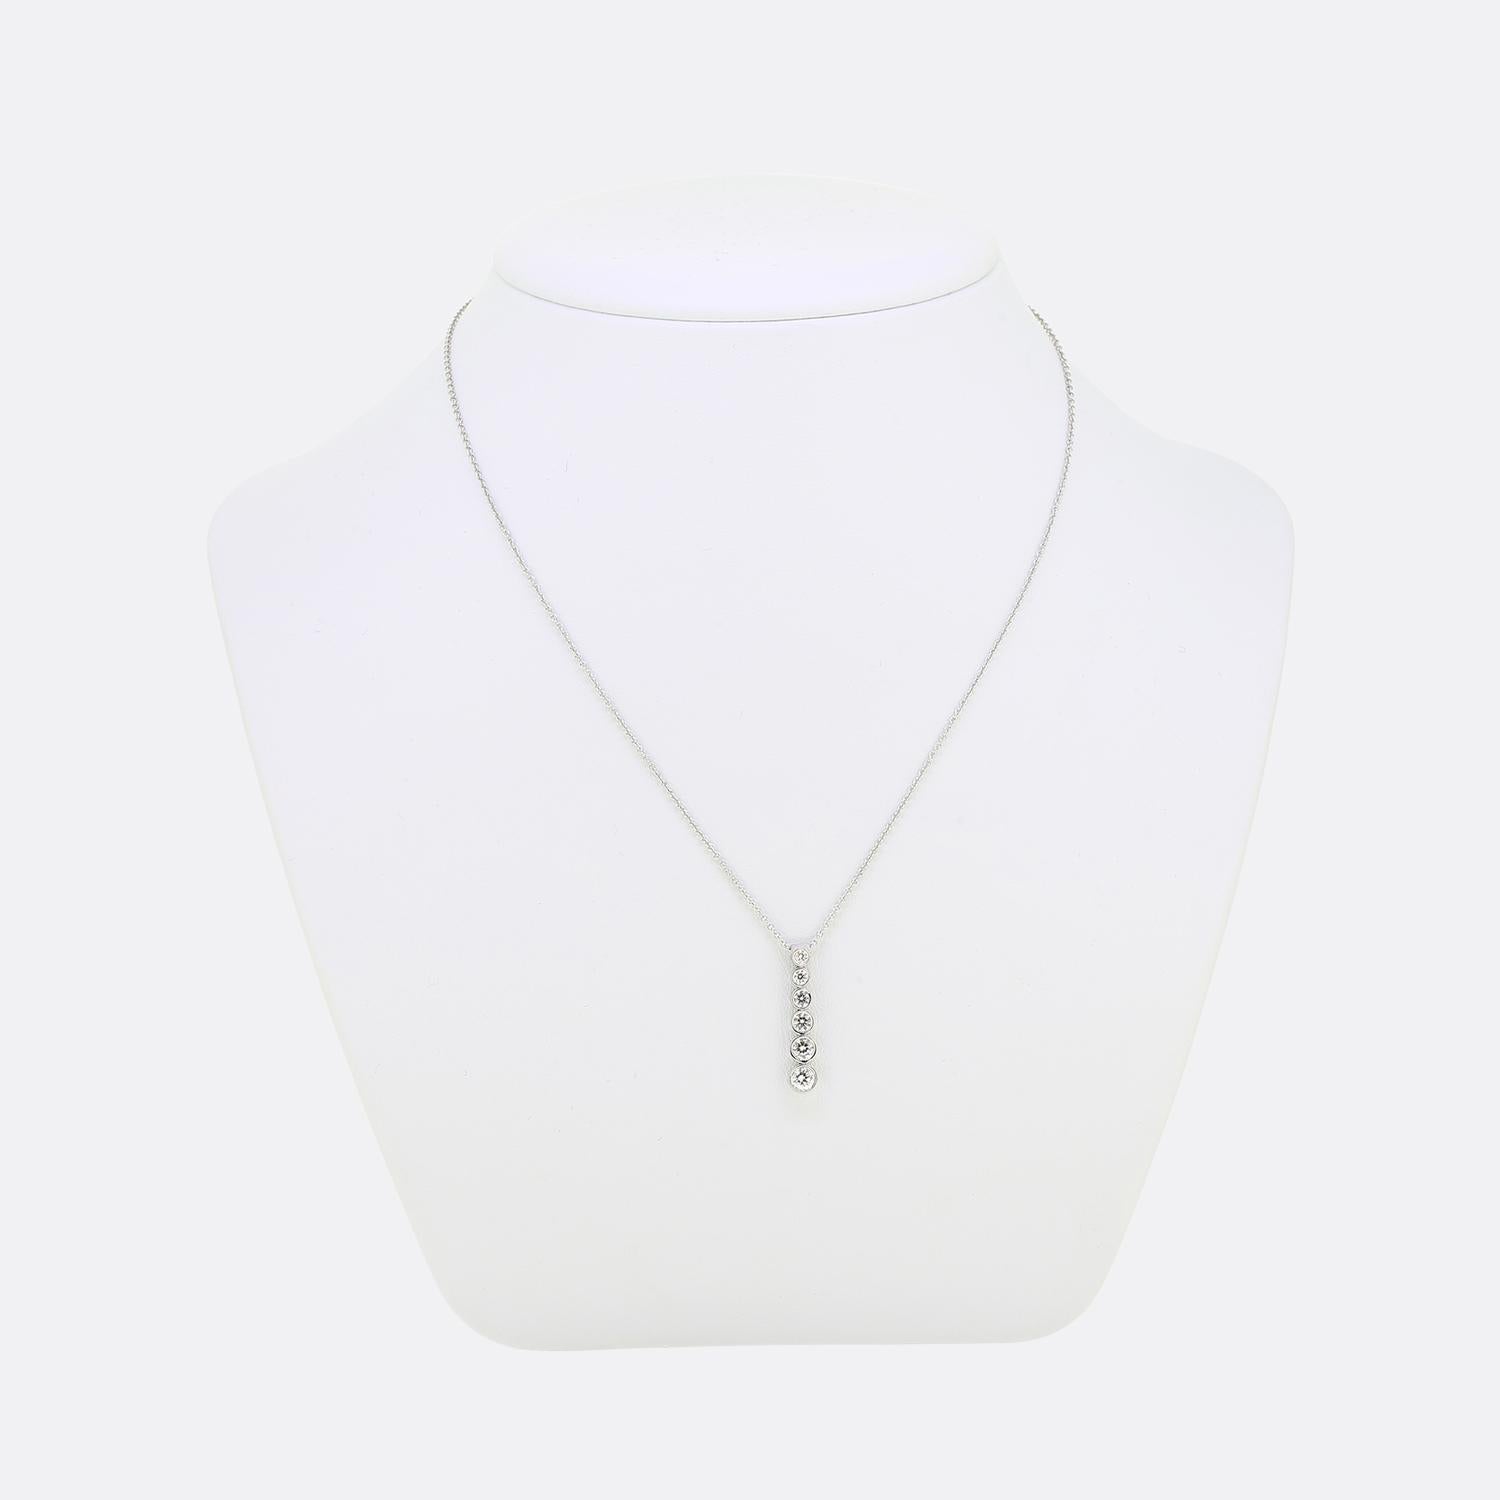 Here we have a wonderful diamond pendant from the world renowned jewellery designer, Tiffany & Co. This piece forms part of their 'Jazz' collection, has been crafted from platinum and showcases six individually rub-over set round brilliant cut